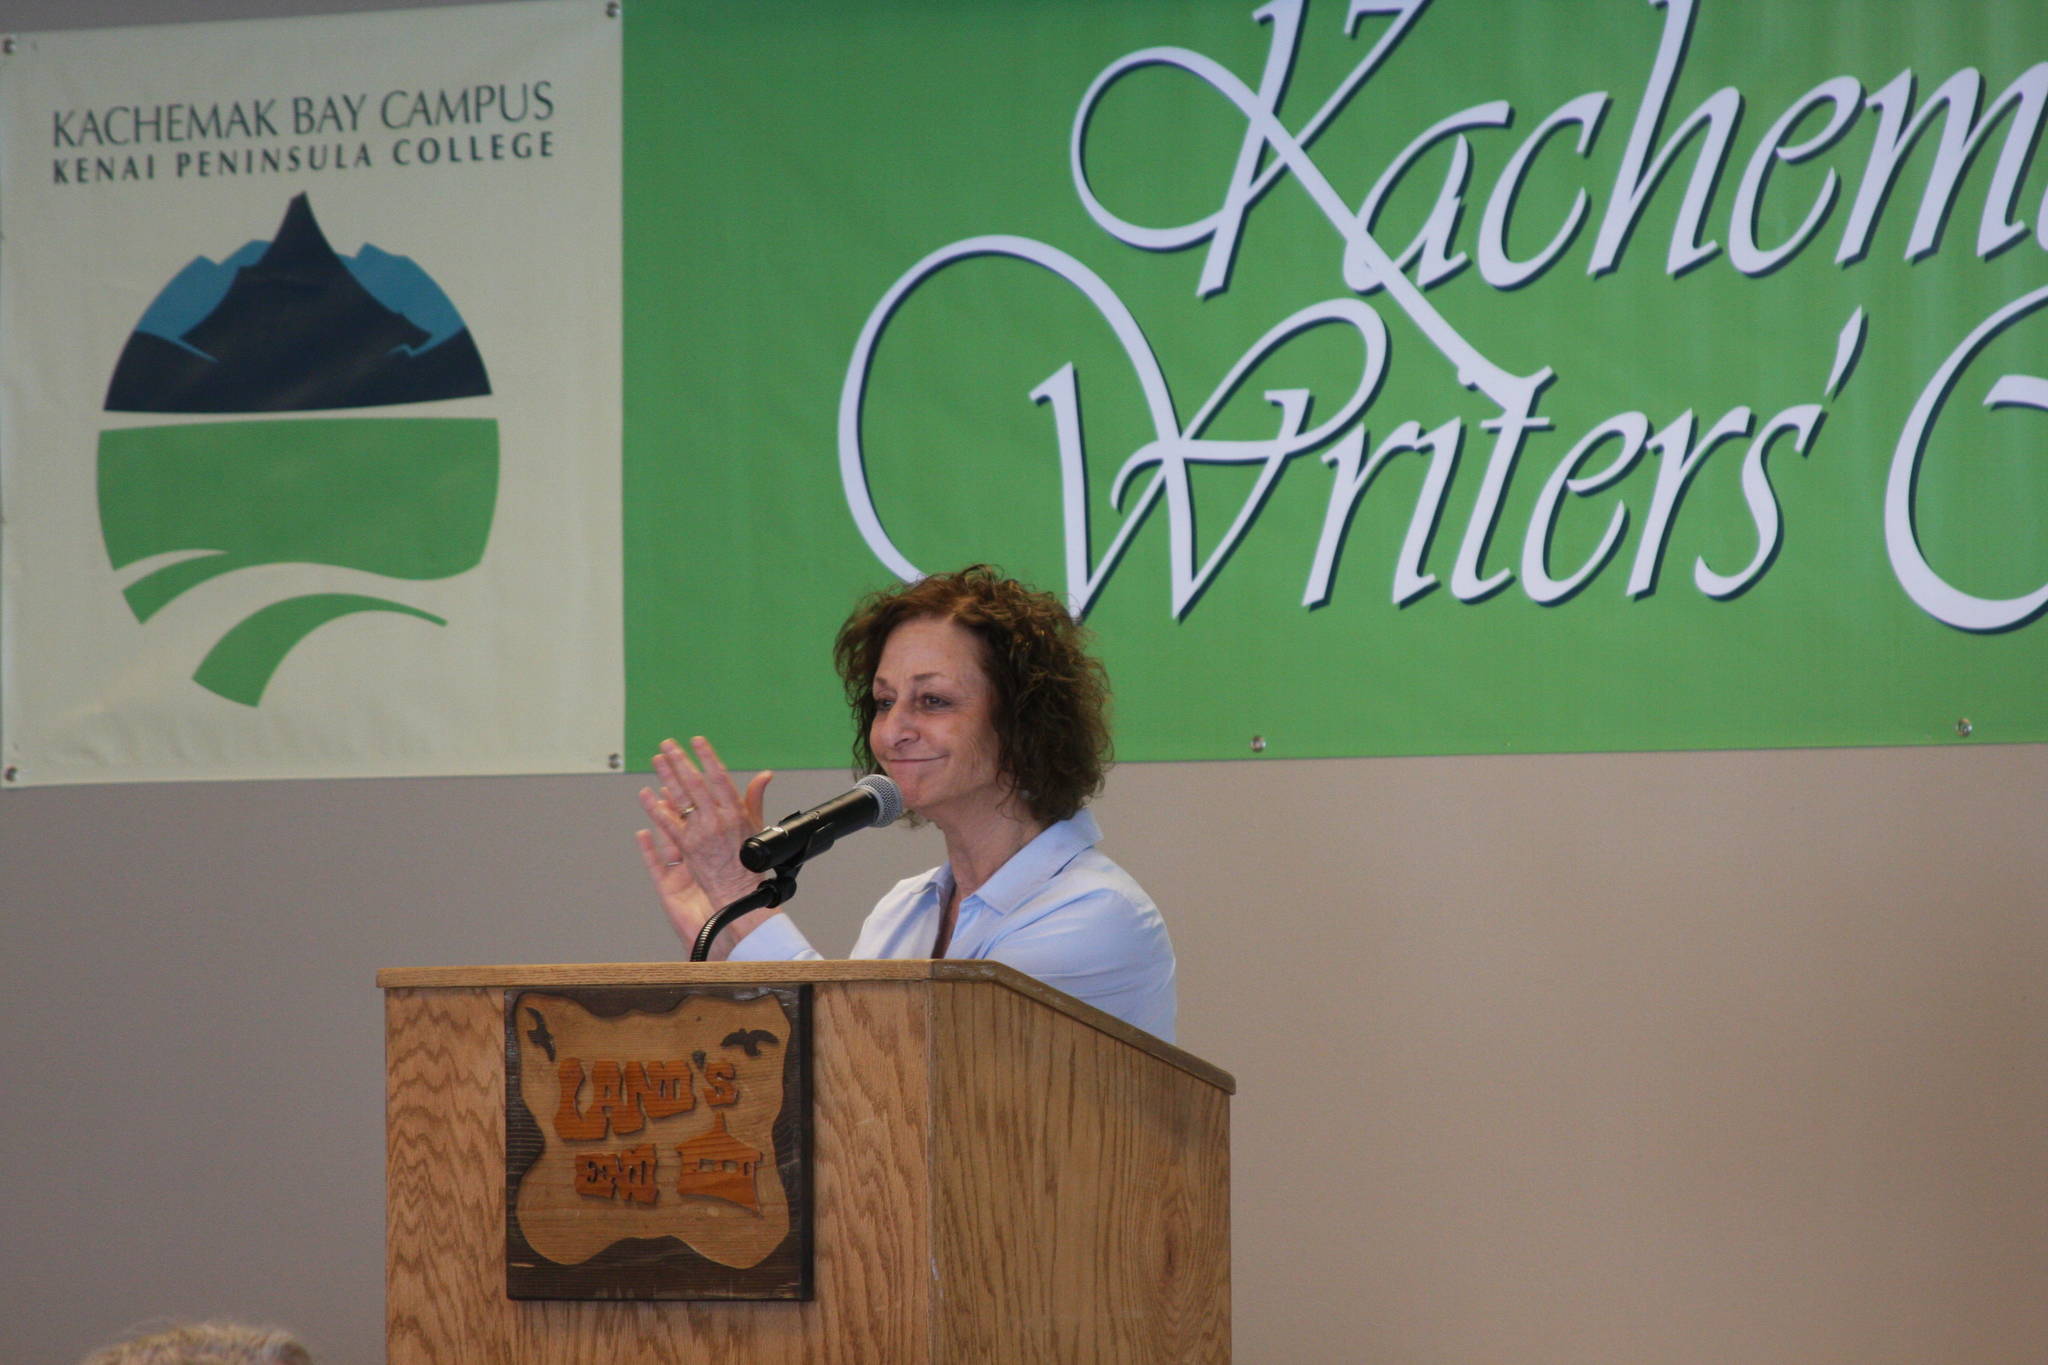 Kachemak Bay Campus Director Carol Swartz gives a final farewell to all of the faculty and attendees of the 2018 Kachemak Bay Writers’ Conference during the closing ceremony on Tuesday, June 12, 2018 at Lands’ End Resort in Homer, Alaska. (Photo by Delcenia Cosman)